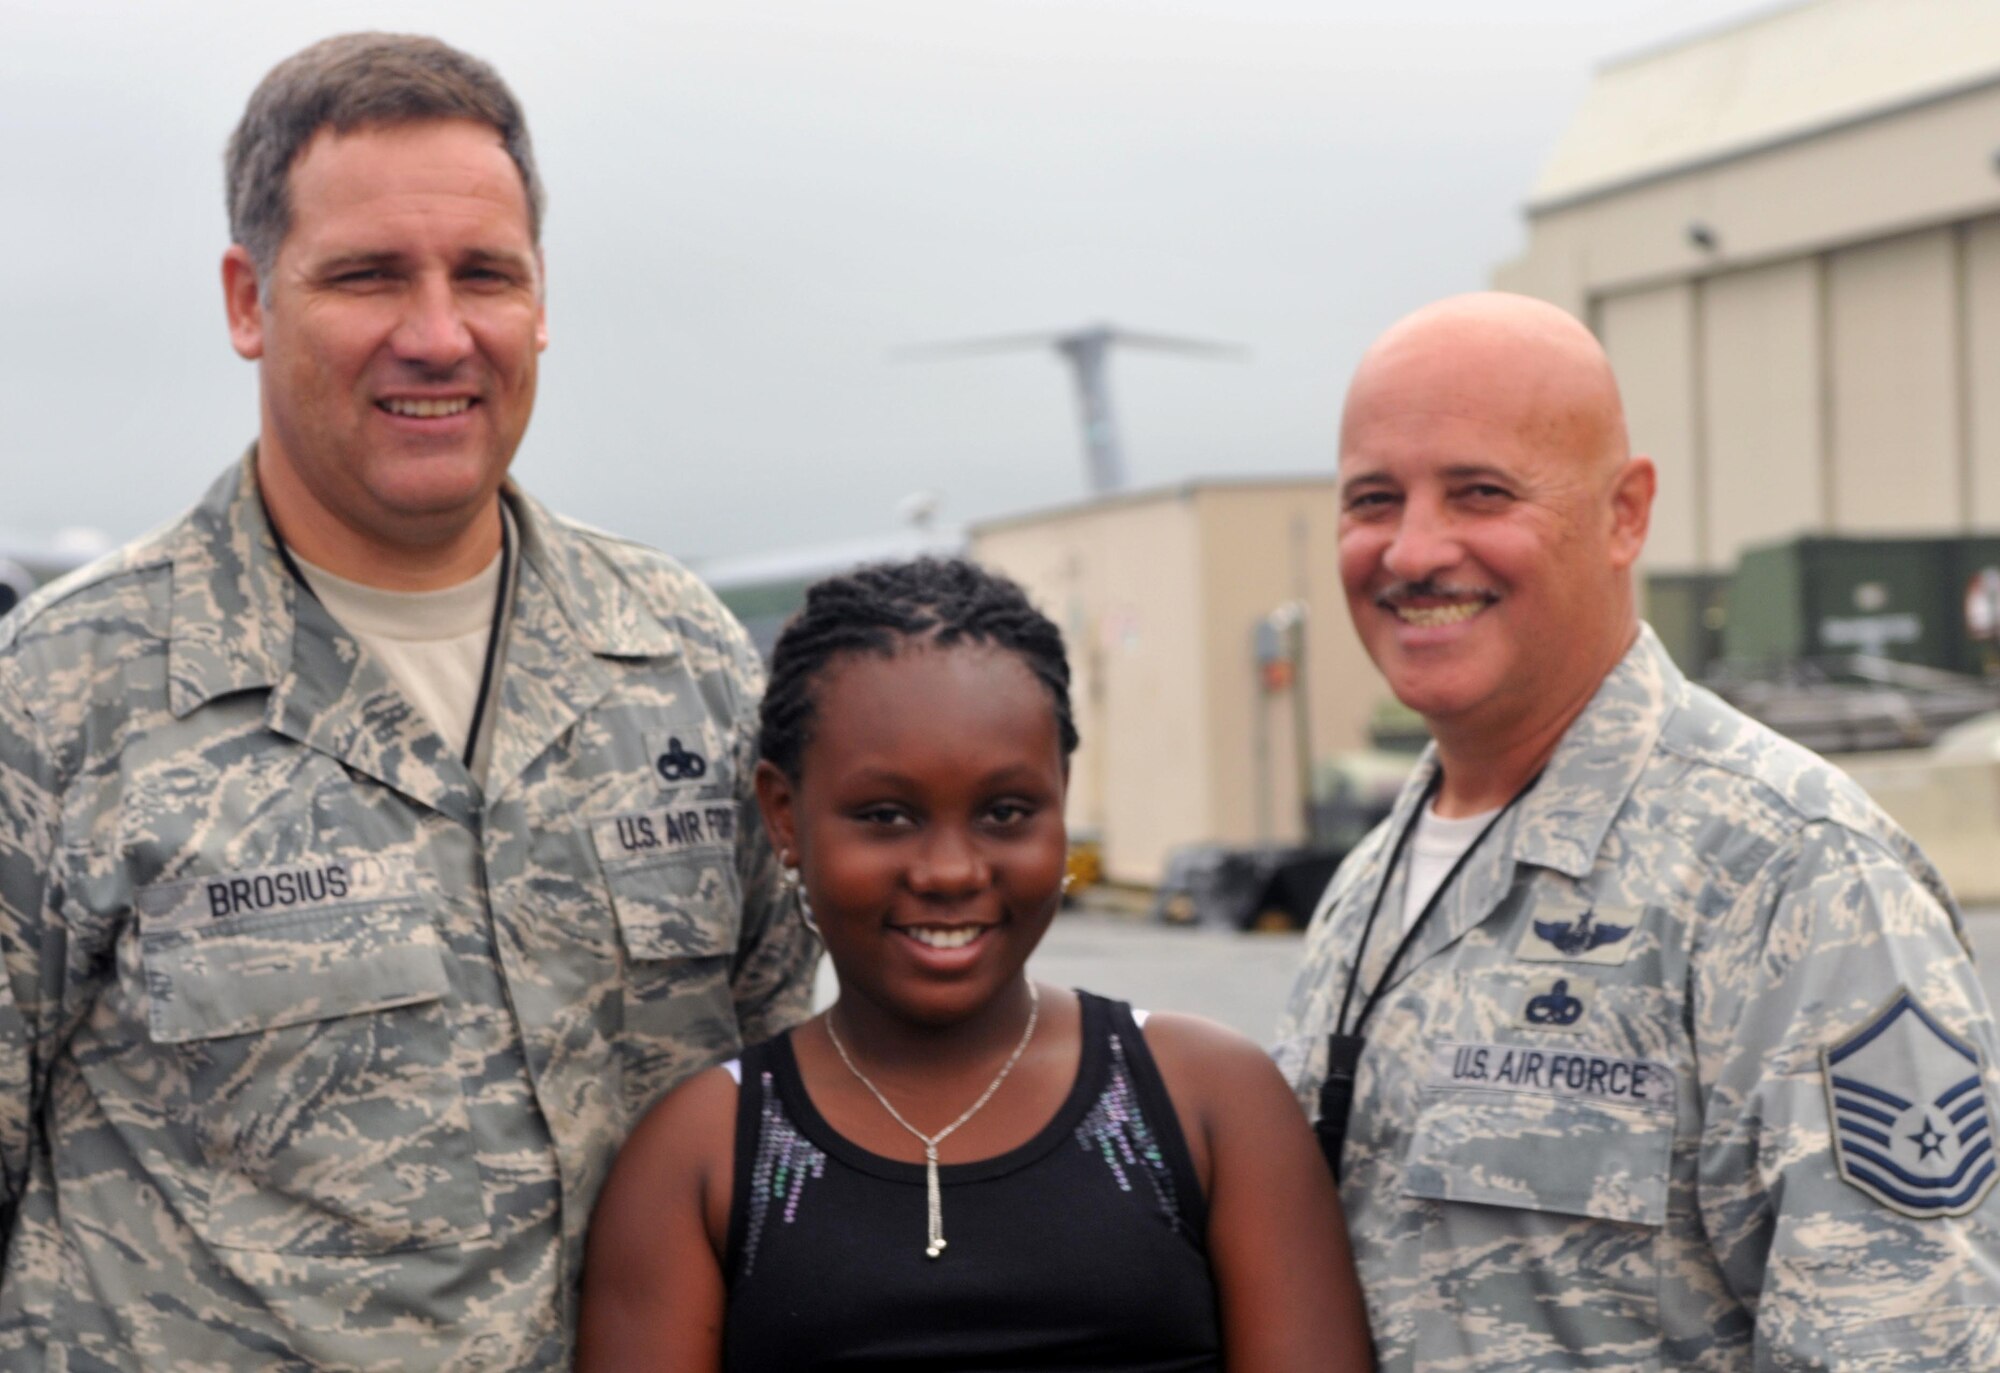 Jedvarline Baptiste, 10, shares a moment with Master Sgts. Curtis Brosius (left) and Richard Biasi, from the 512th Aircraft Maintenance Squadron, following a C-5 tour Aug. 15, 2011, on Dover Air Force Base, Del. As part of a program called Fresh Air Fund, the French-speaking girl, from Brooklyn, N.Y., lived with the family of Pam Jackson, 512th Financial Management Office chief. Jackson's daughter, Meaghan Ellwanger, made it possible for Jedvarline to experience several outdoor activities such as hiking and swimming as well as some indoor past times including crafting and scrapbooking. (U.S. Air Force photo by Sarah Starkey)